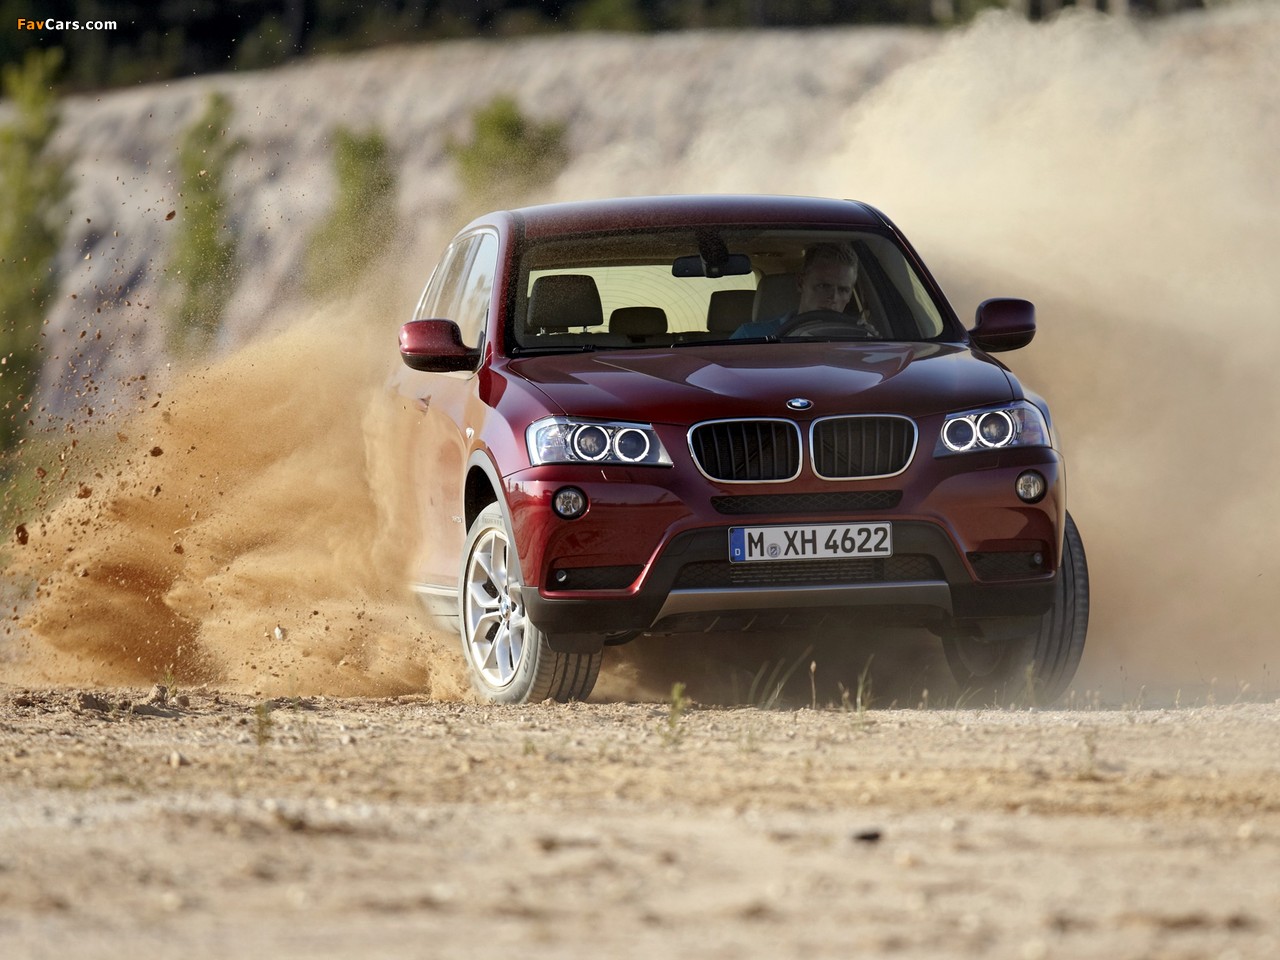 BMW X3 xDrive20d (F25) 2010 pictures (1280 x 960)